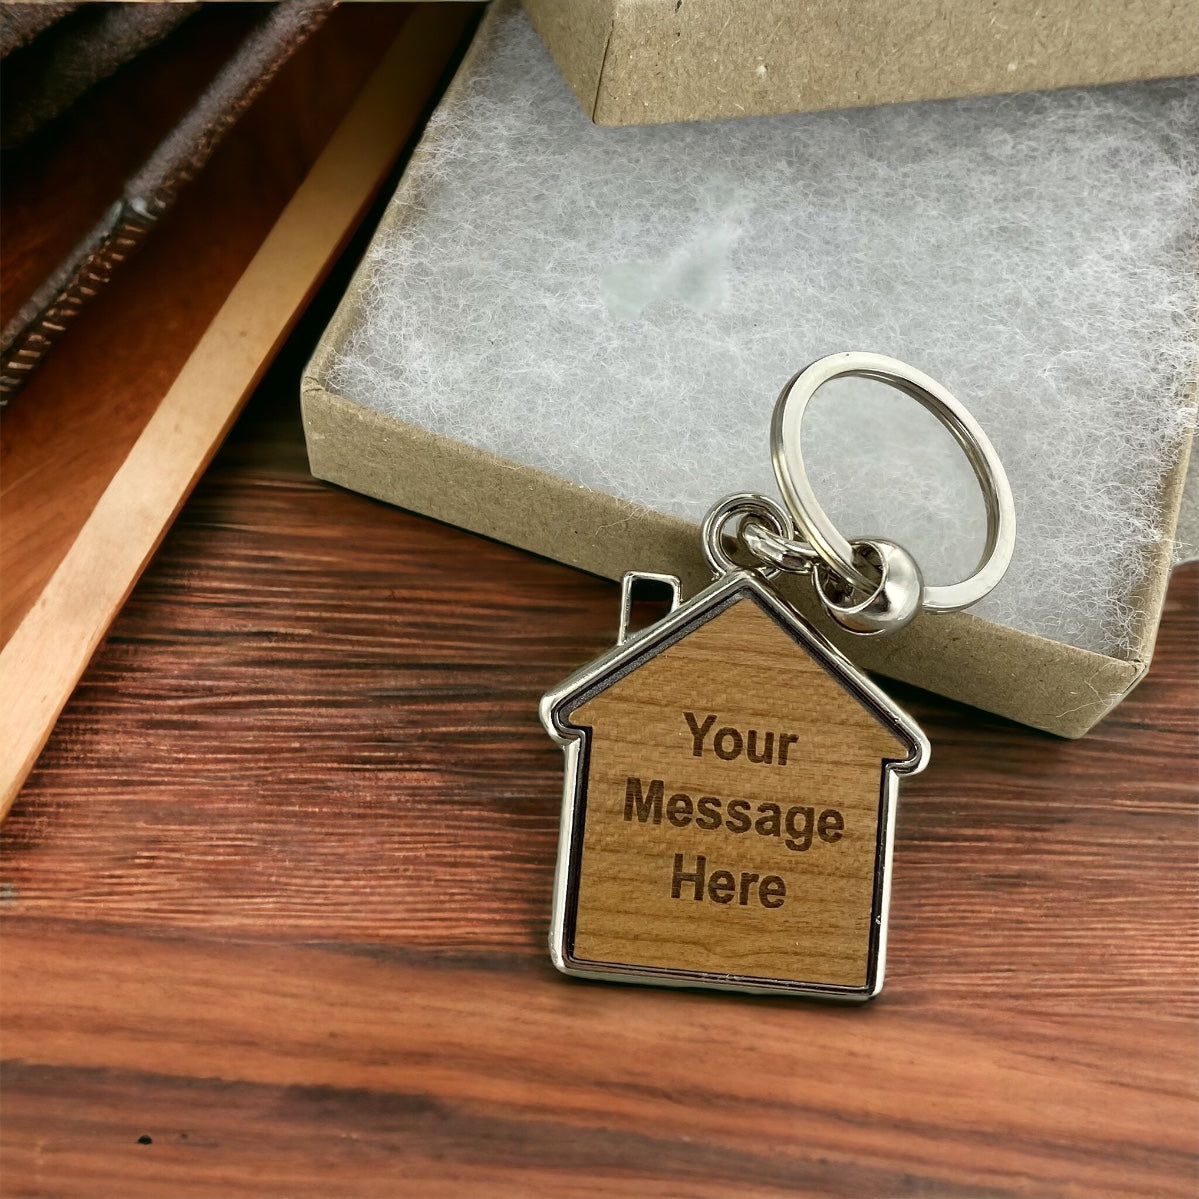 Personalised First Home Keyring, New Home Gift, New House Keyring, Housewarming Gift, Couples Gift